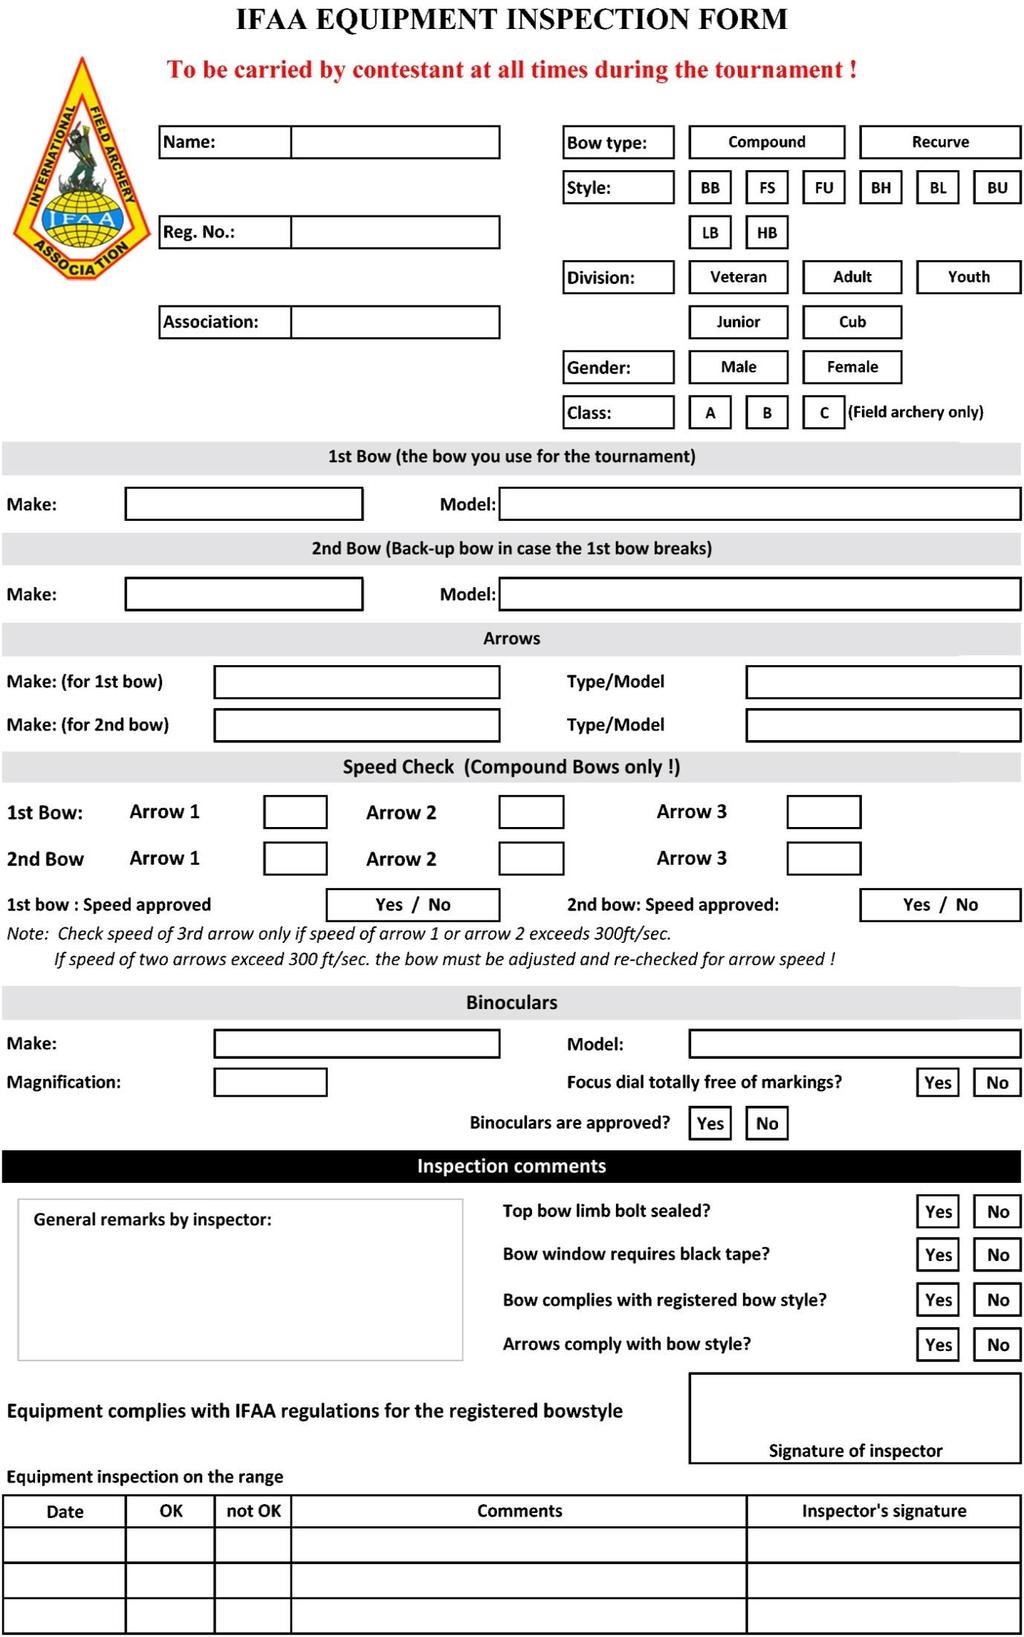 A typical equipment inspection form.